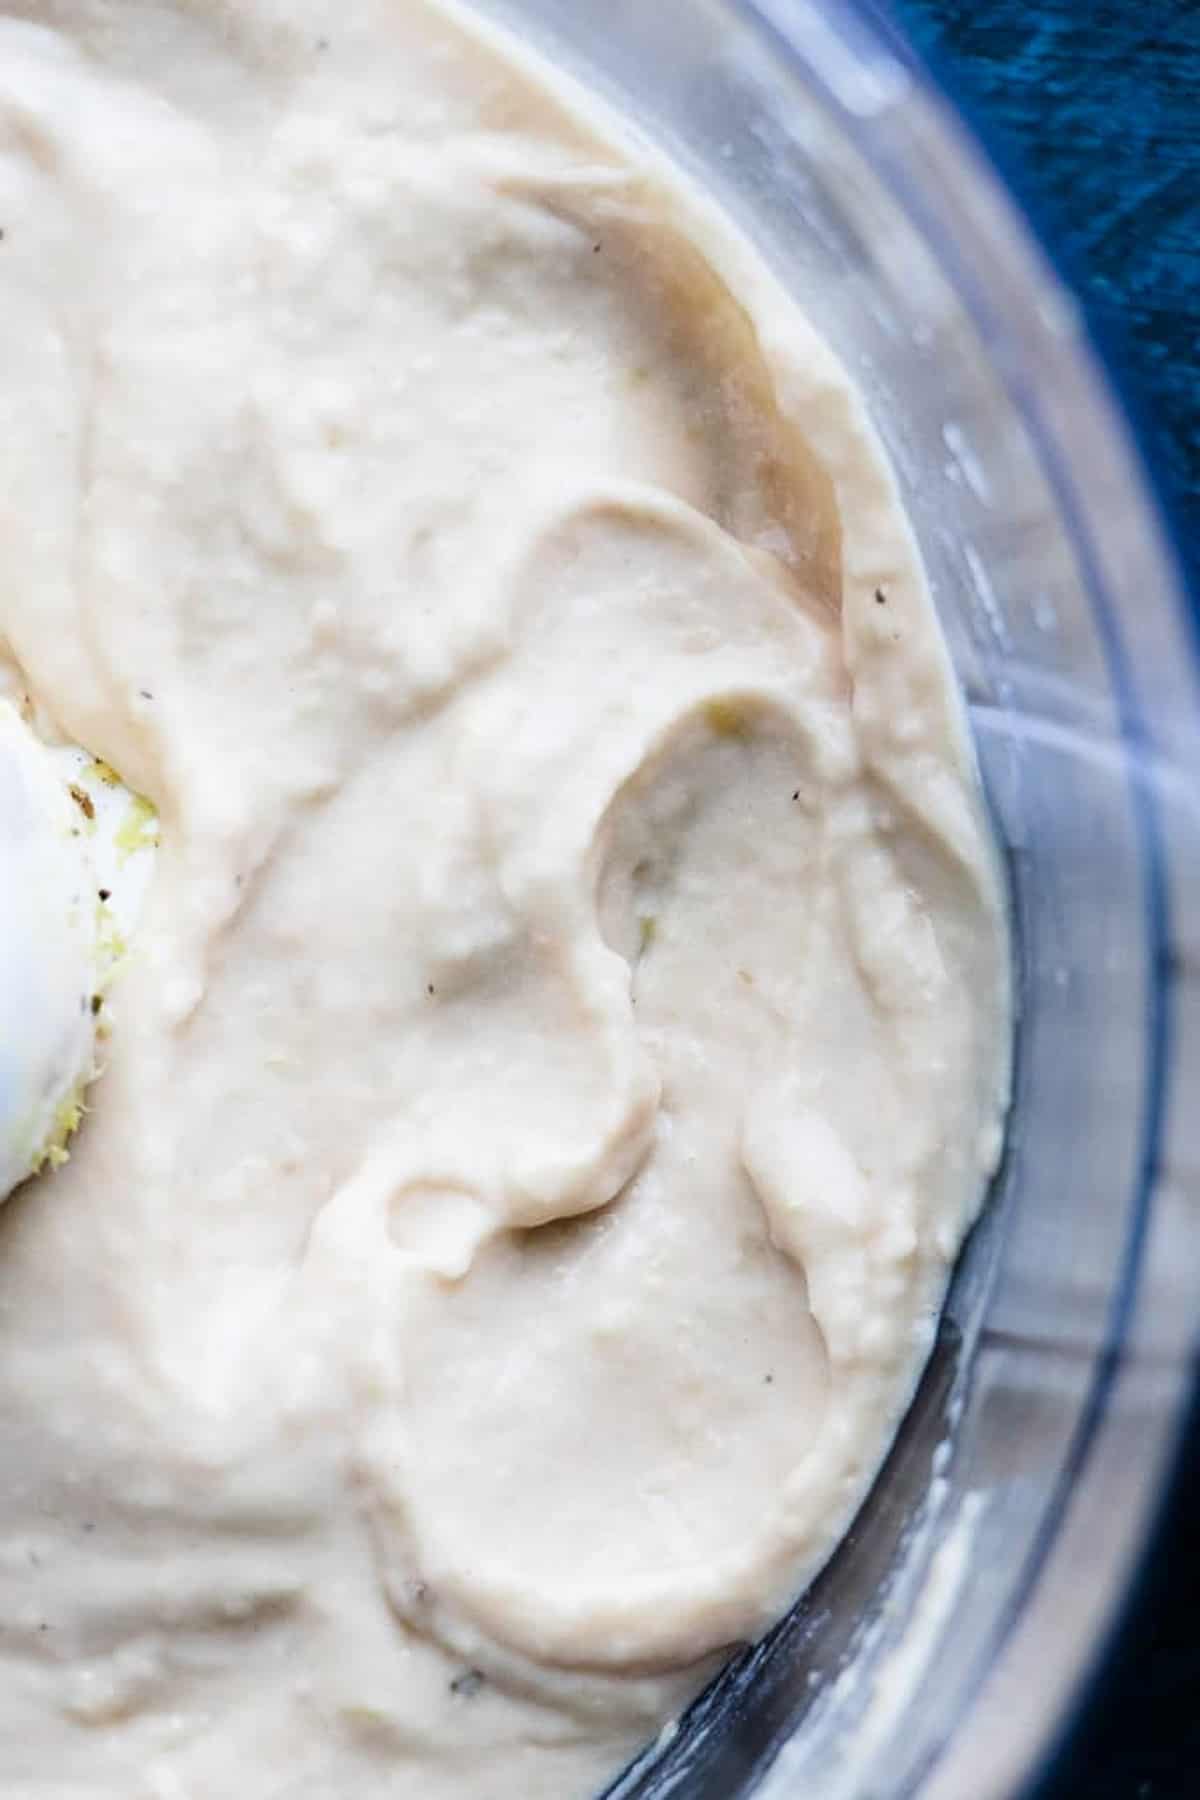 White bean dip blended until smooth and creamy in a food processor.